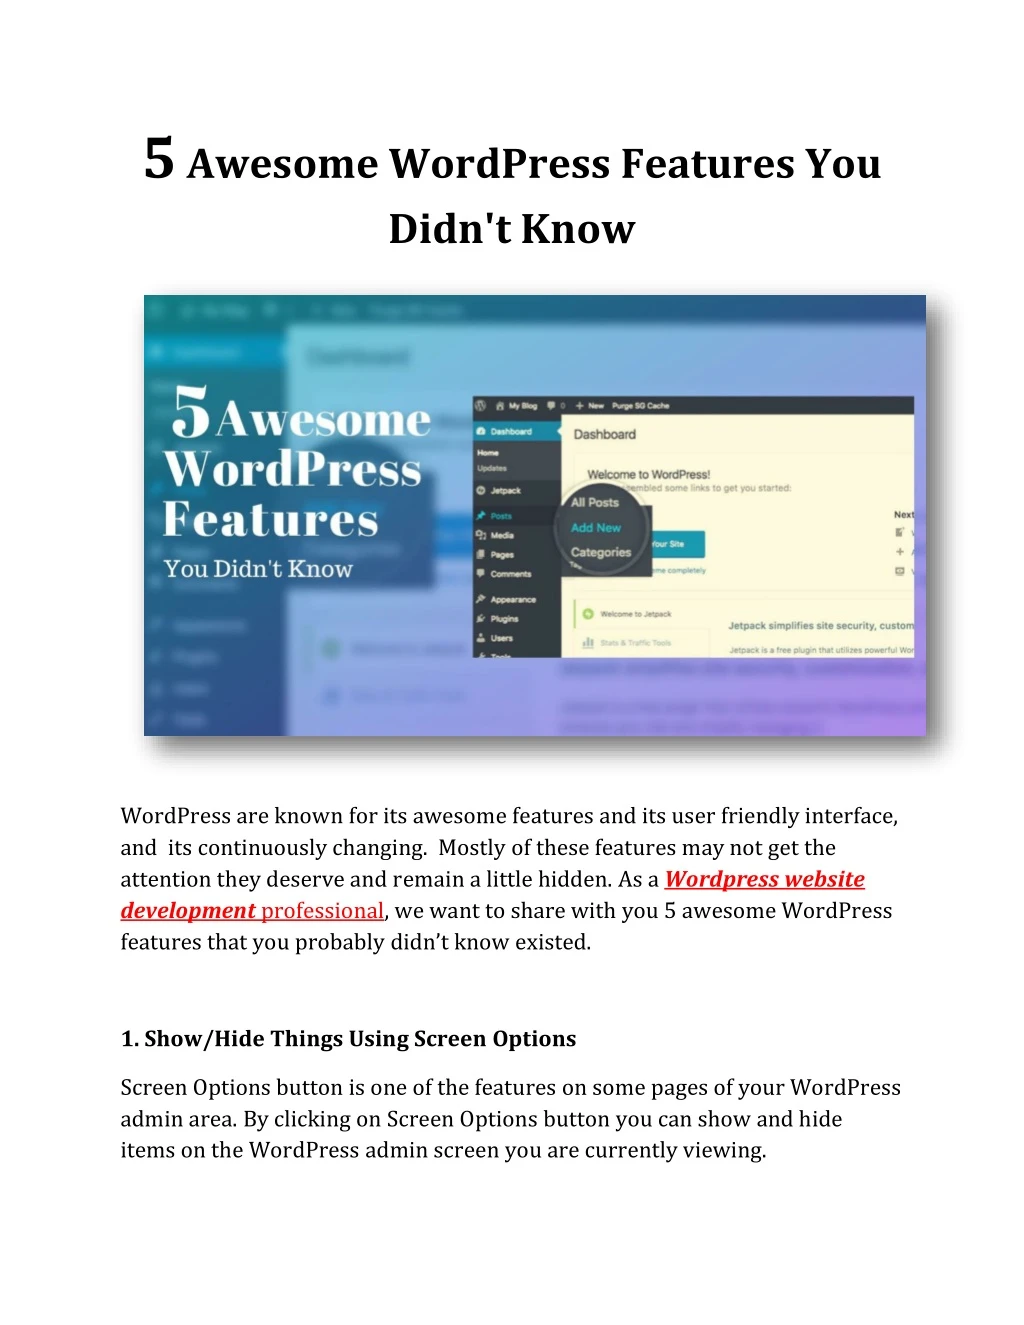 5 awesome wordpress features you didn t know